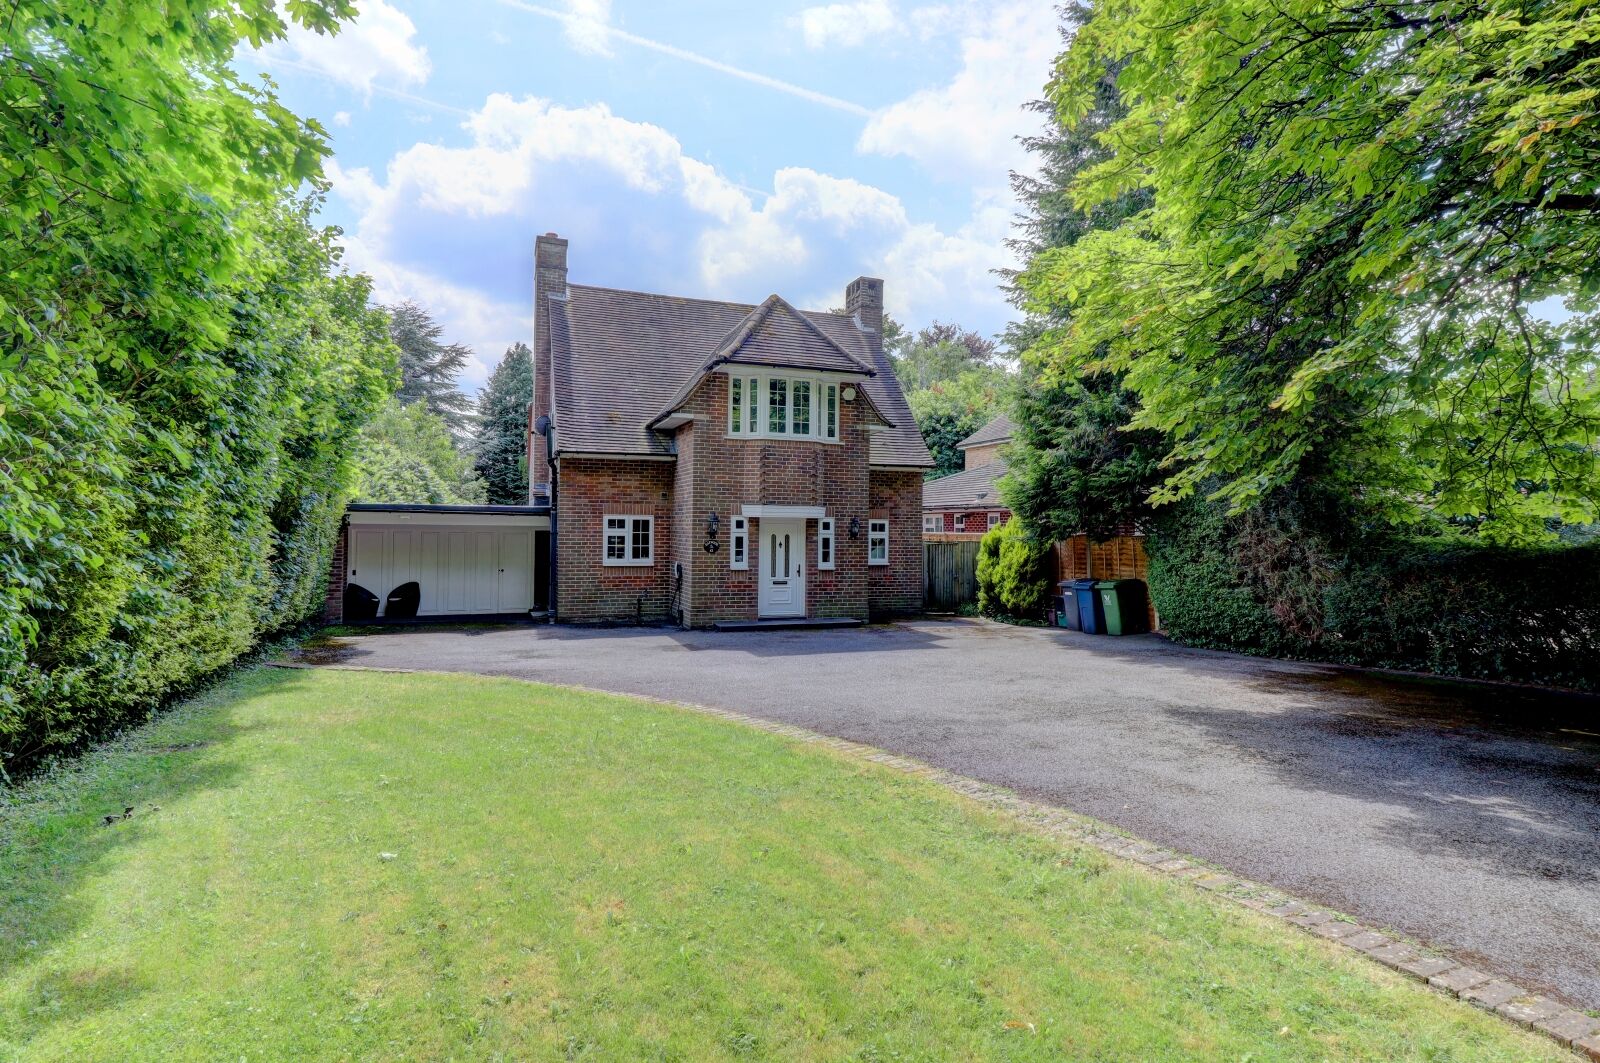 3 bedroom detached house for sale Daws Hill Lane, High Wycombe, HP11, main image